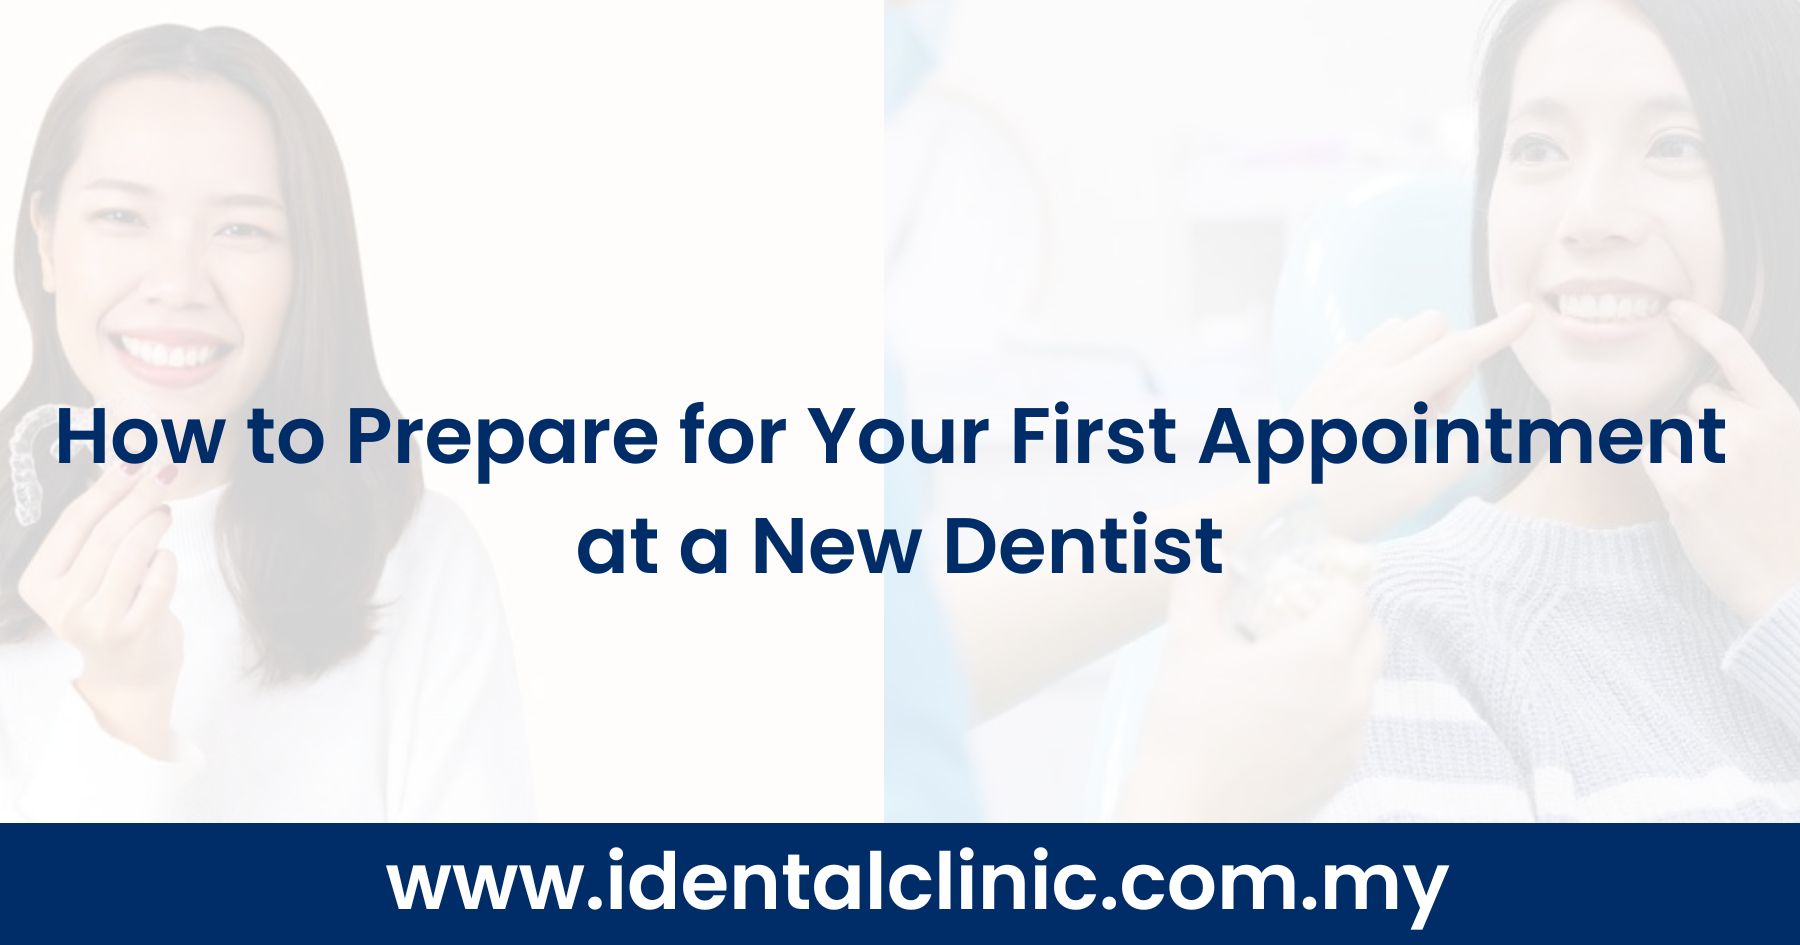 How to Prepare for Your First Appointment at a New Dentist